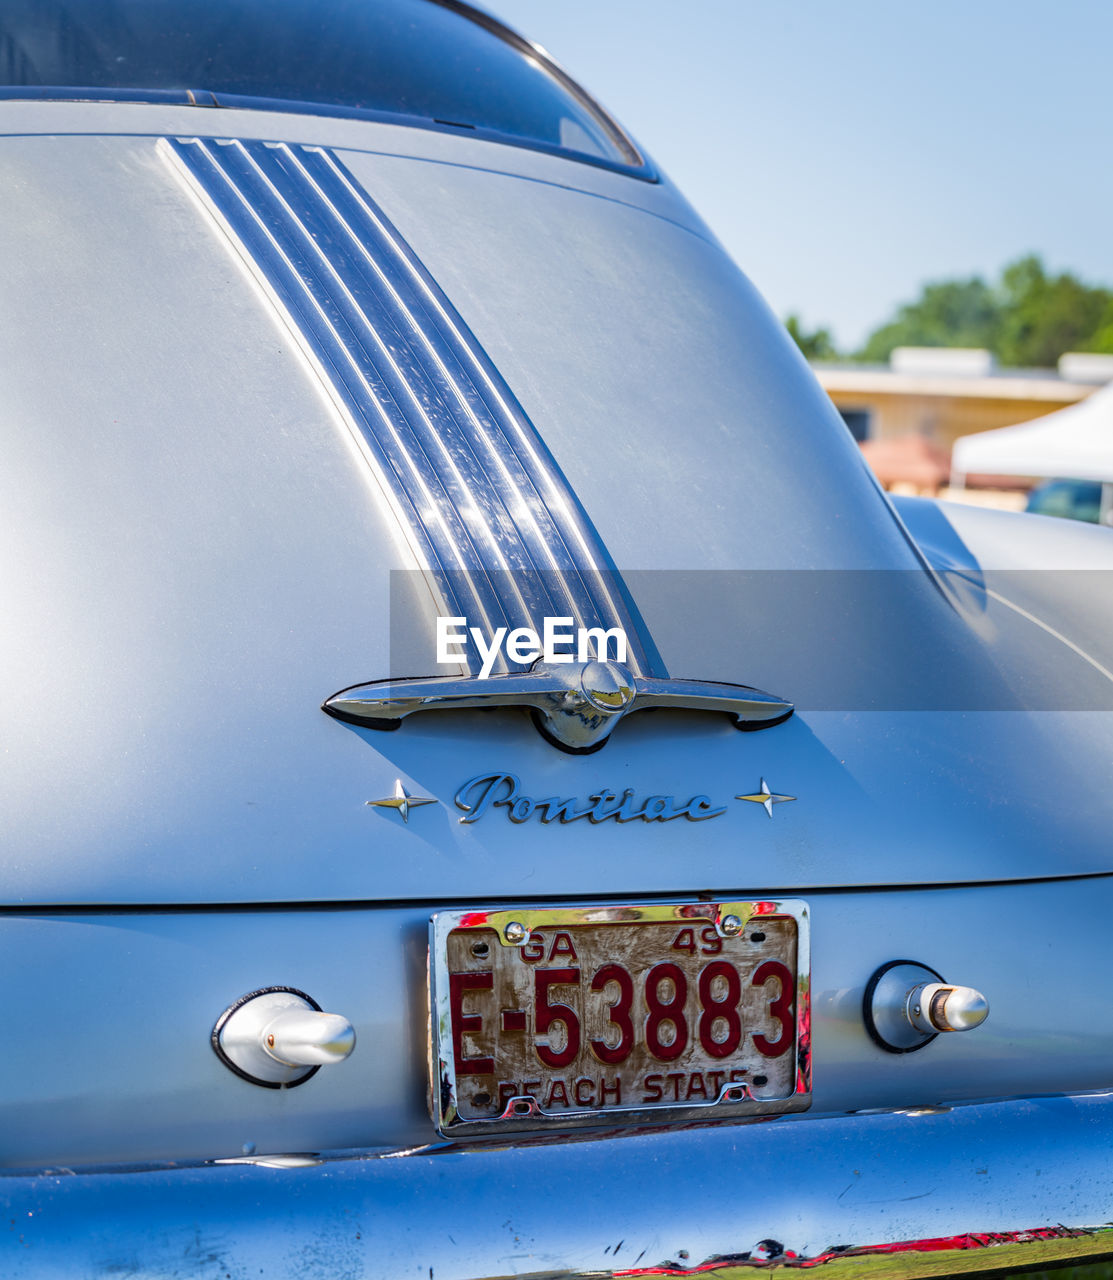 CLOSE-UP OF VINTAGE CAR WITH BLUE METAL